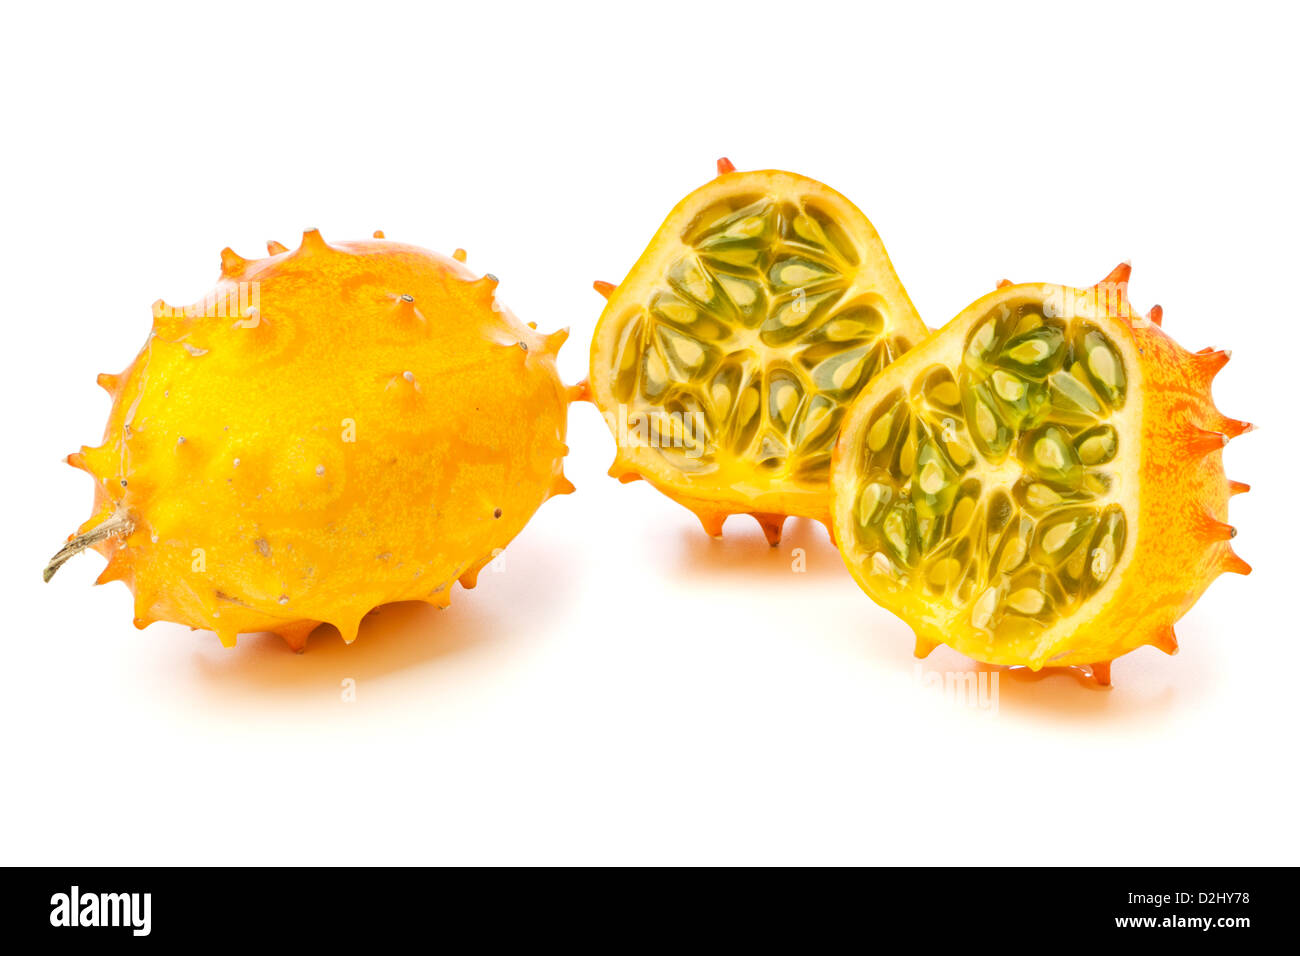 Whole and halved Kiwano fruits, also called African Horned melon or Horned Cucumber, isolated on white background Stock Photo